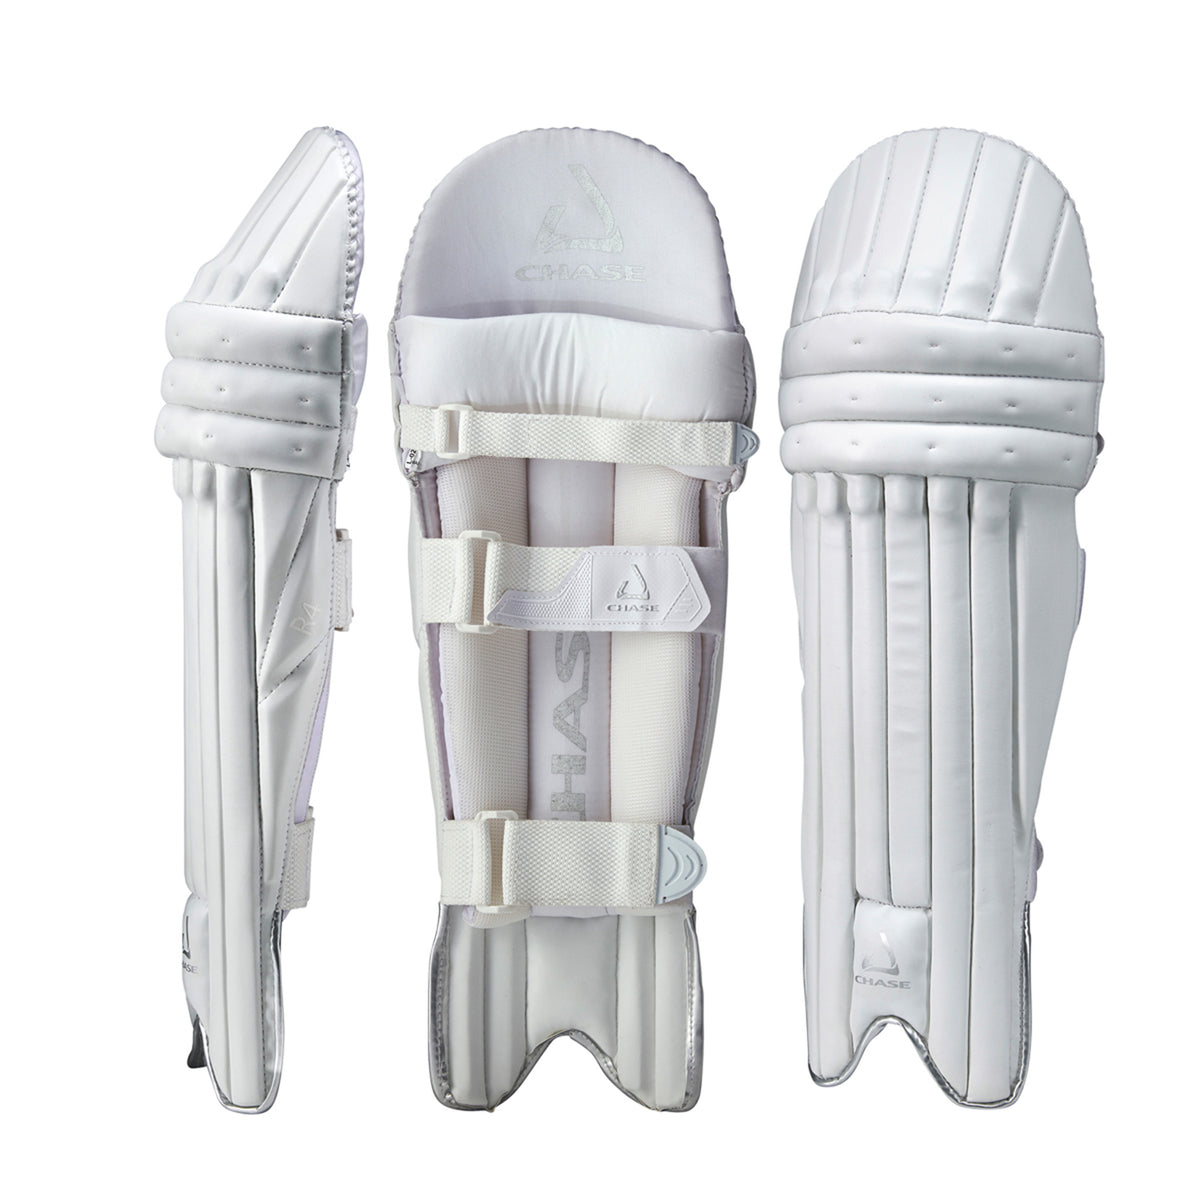 Chase R4 Batting Pads